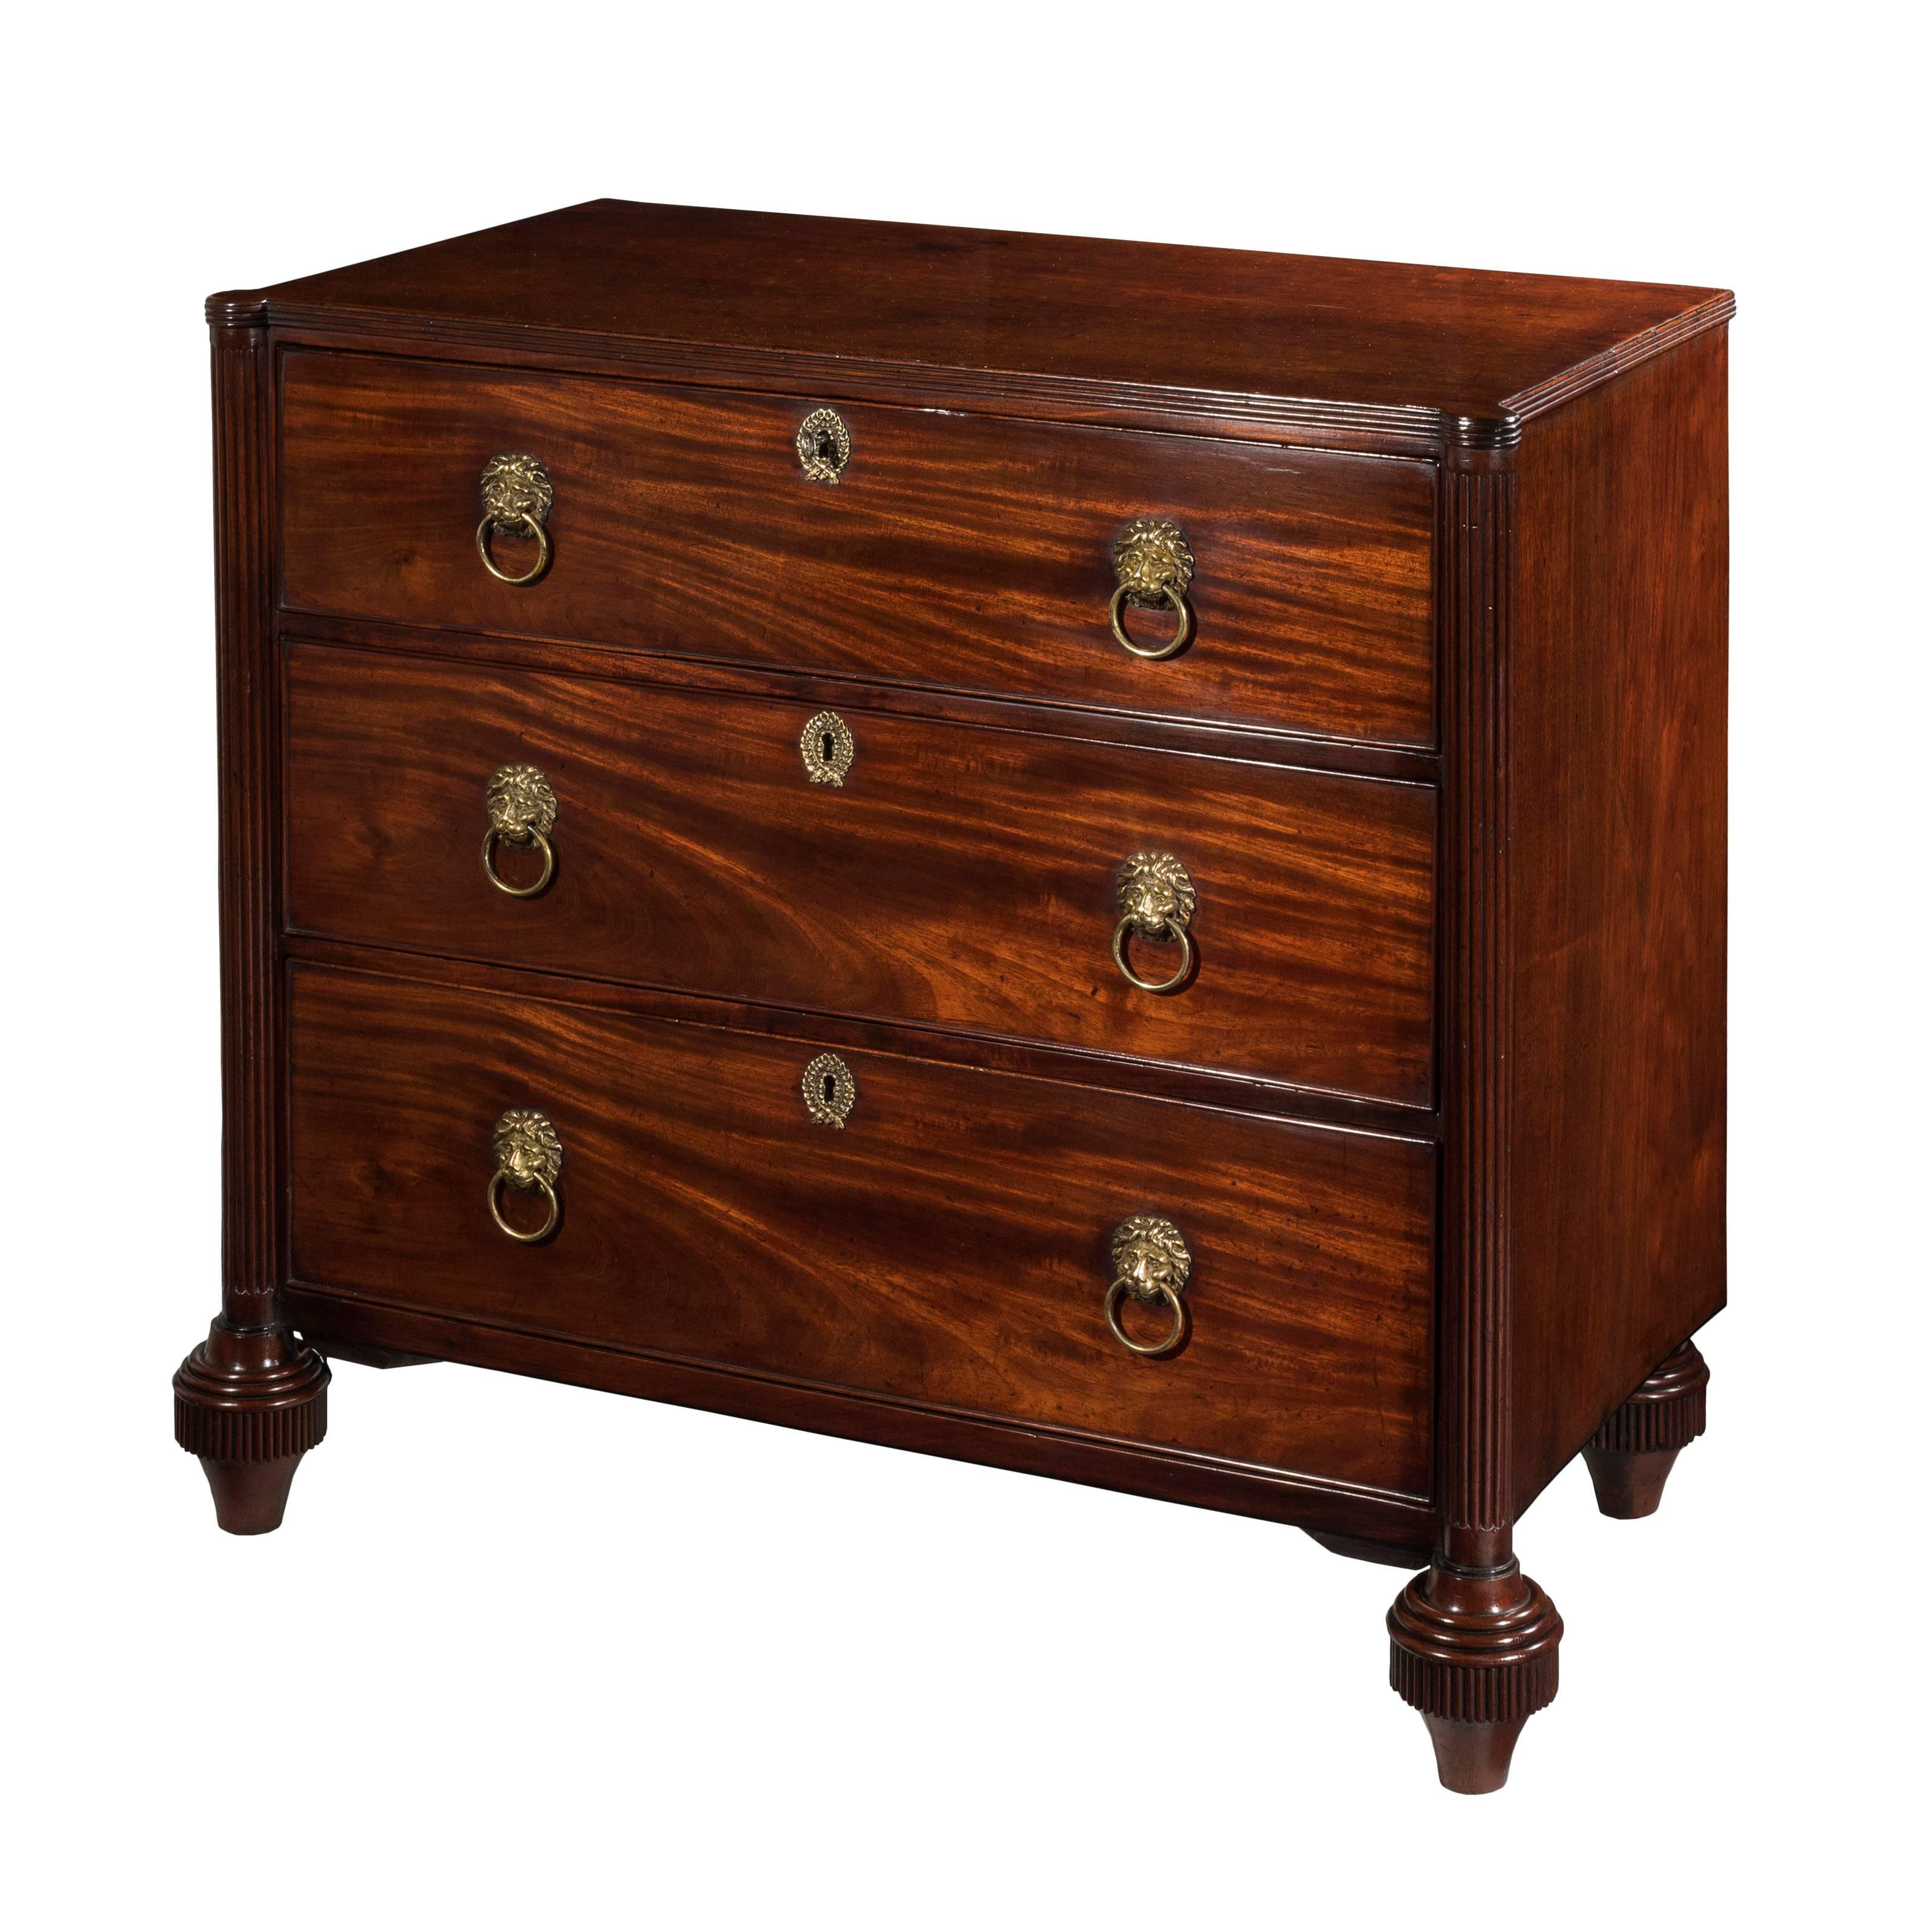 Late 18th Century English 18th Century Mahogany Gillows Chest of Drawers